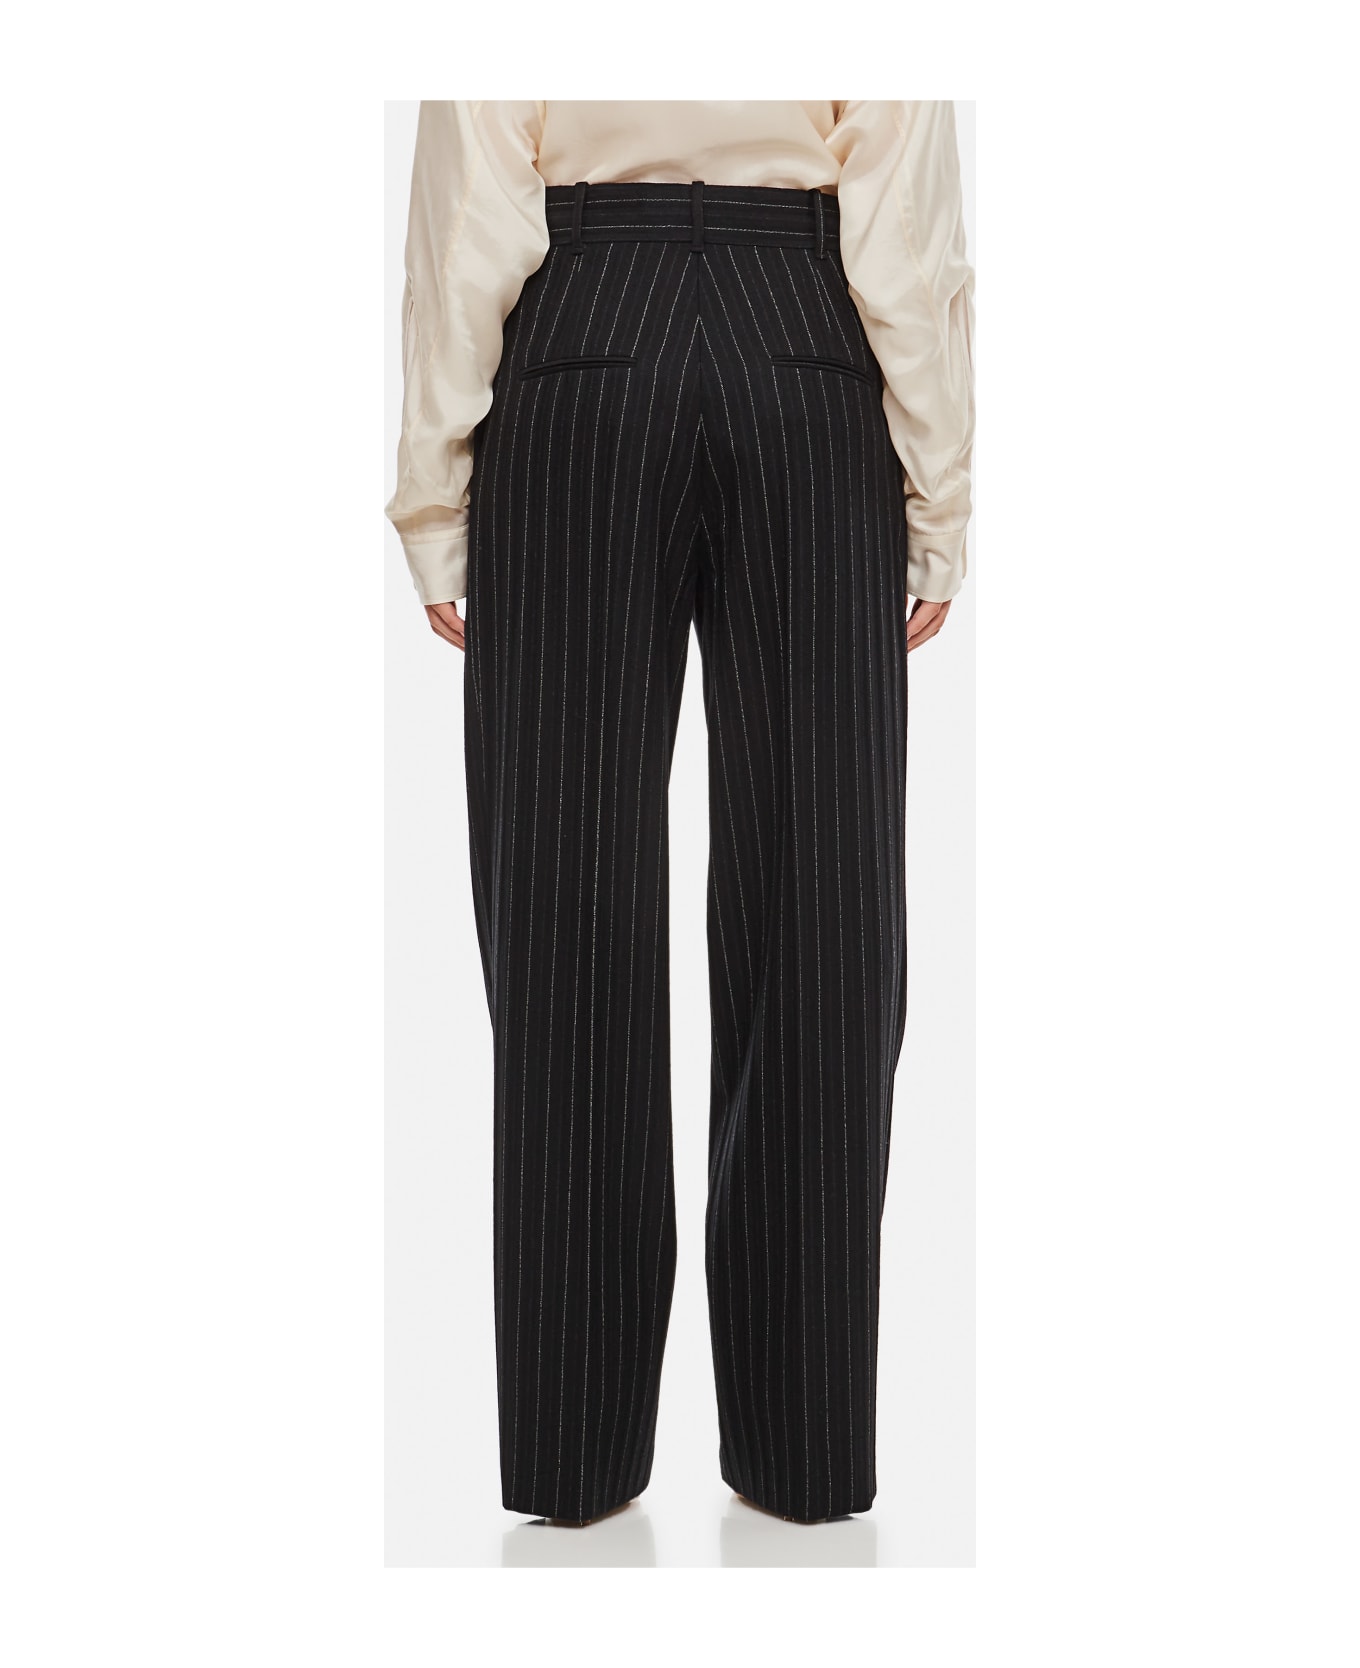 Quira Wool Suit Trousers - Black